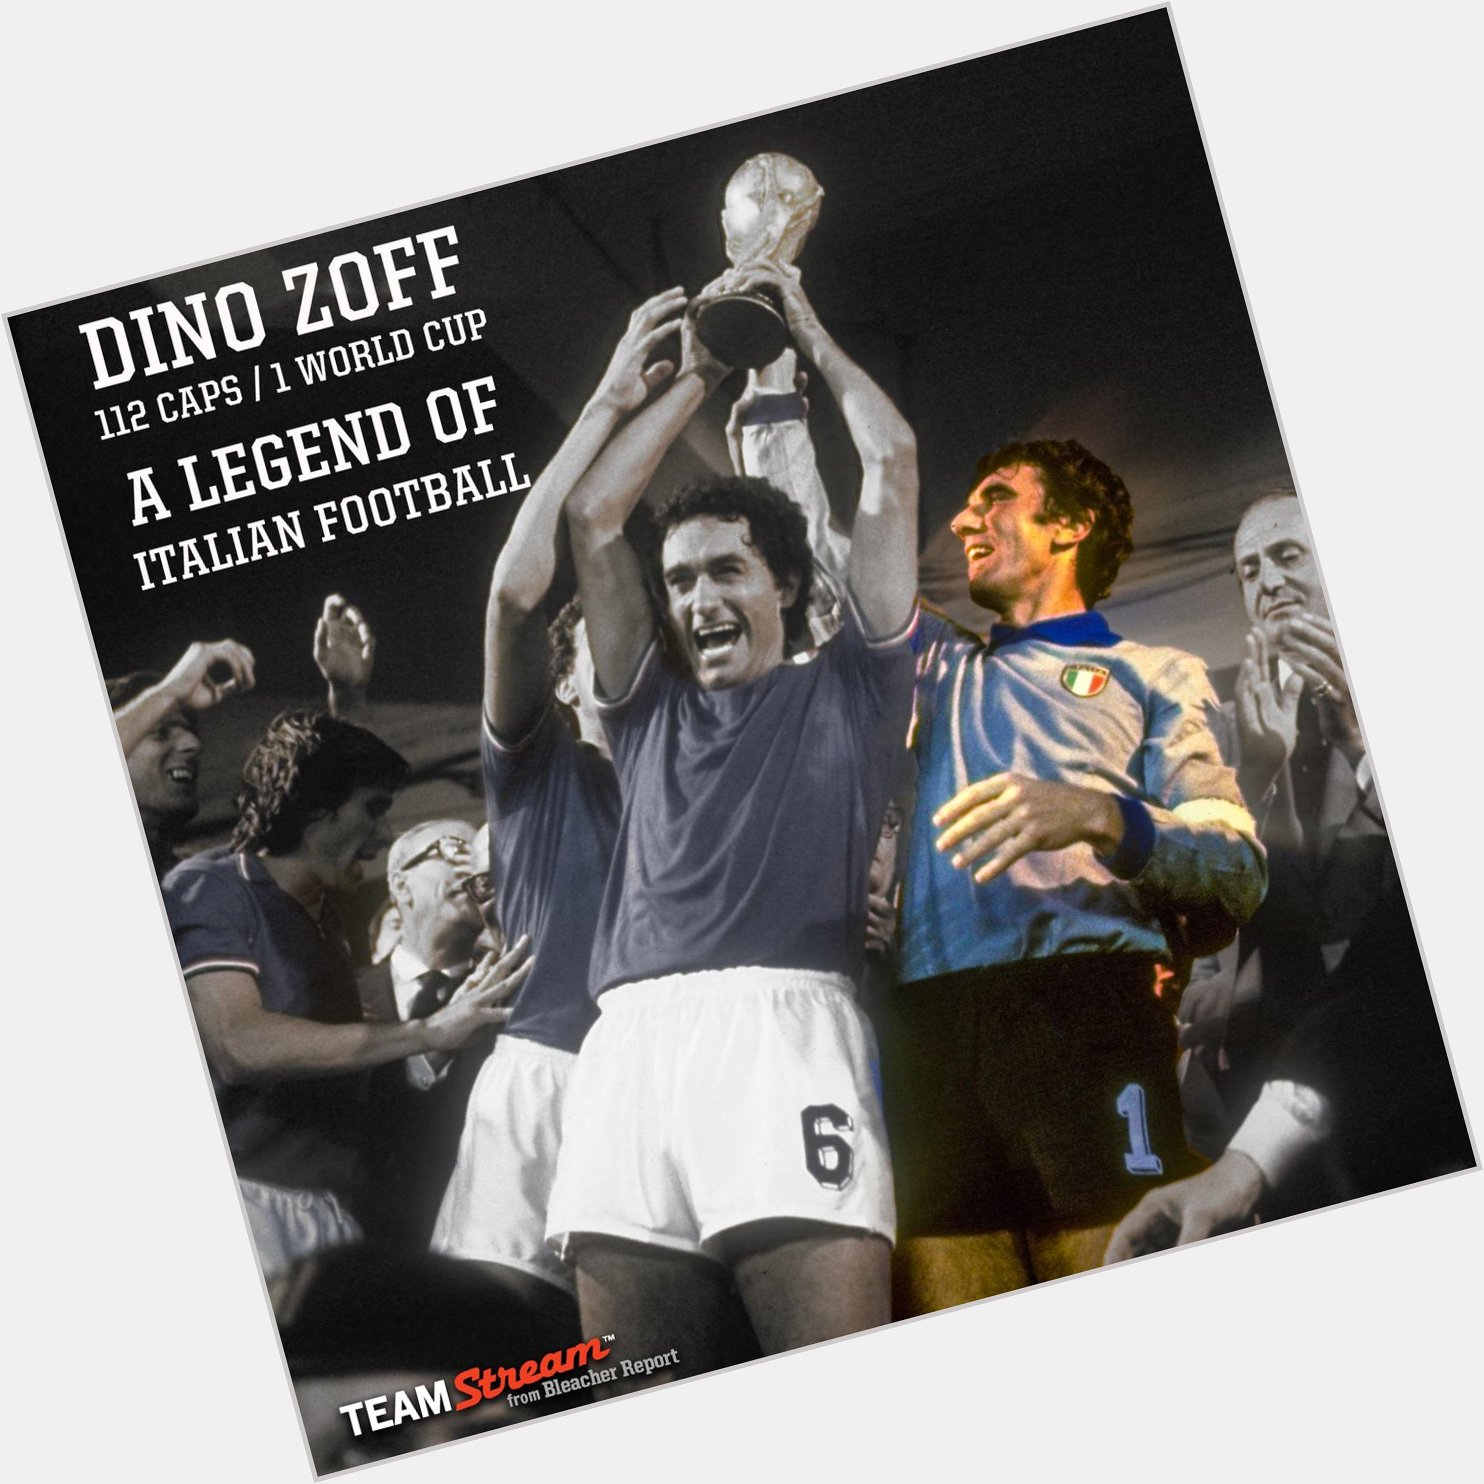 Happy 73rd birthday to Dino one of history s great goalkeepers, who won the 1982 World Cup with 